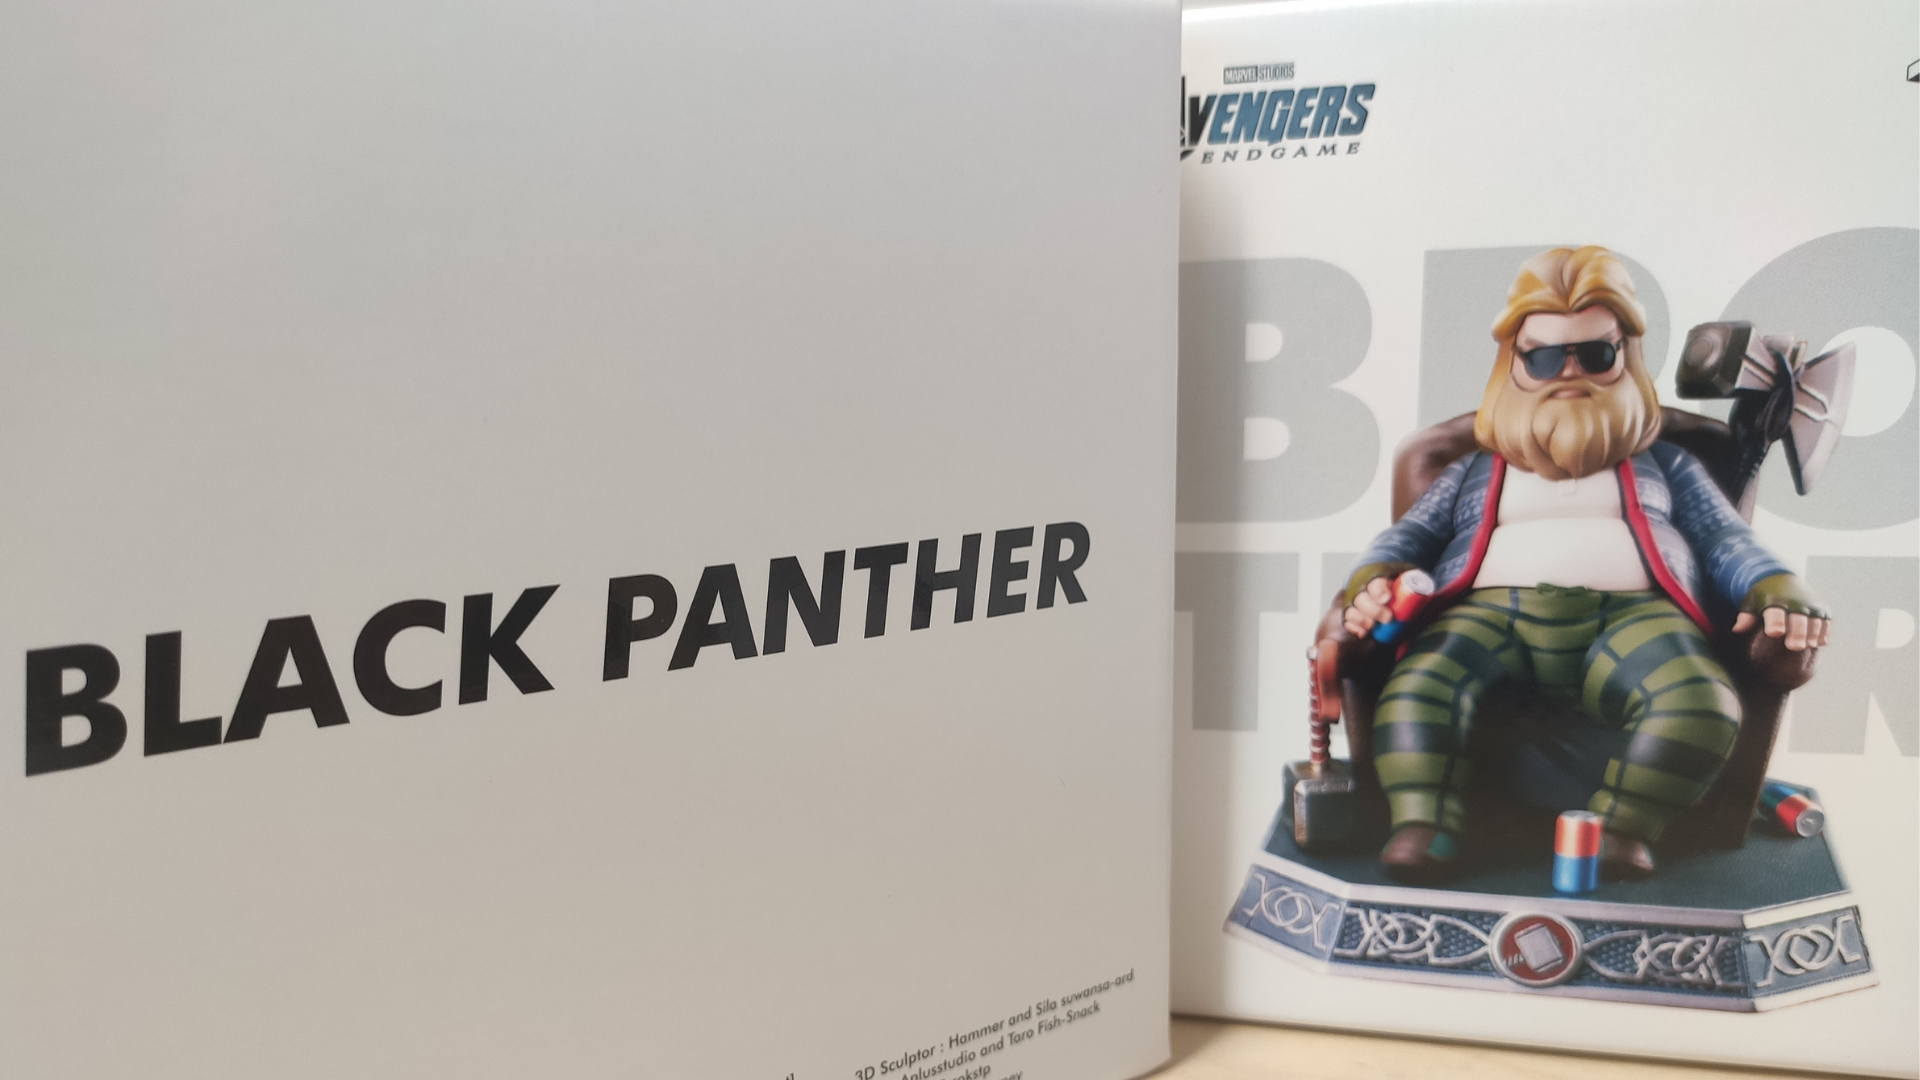 left-side-is-the-name-of-toylaxy-marvel-avenger-4-end-game-wave3-black-panther-figure-and-front-side-of-fatty-thor-figure-package